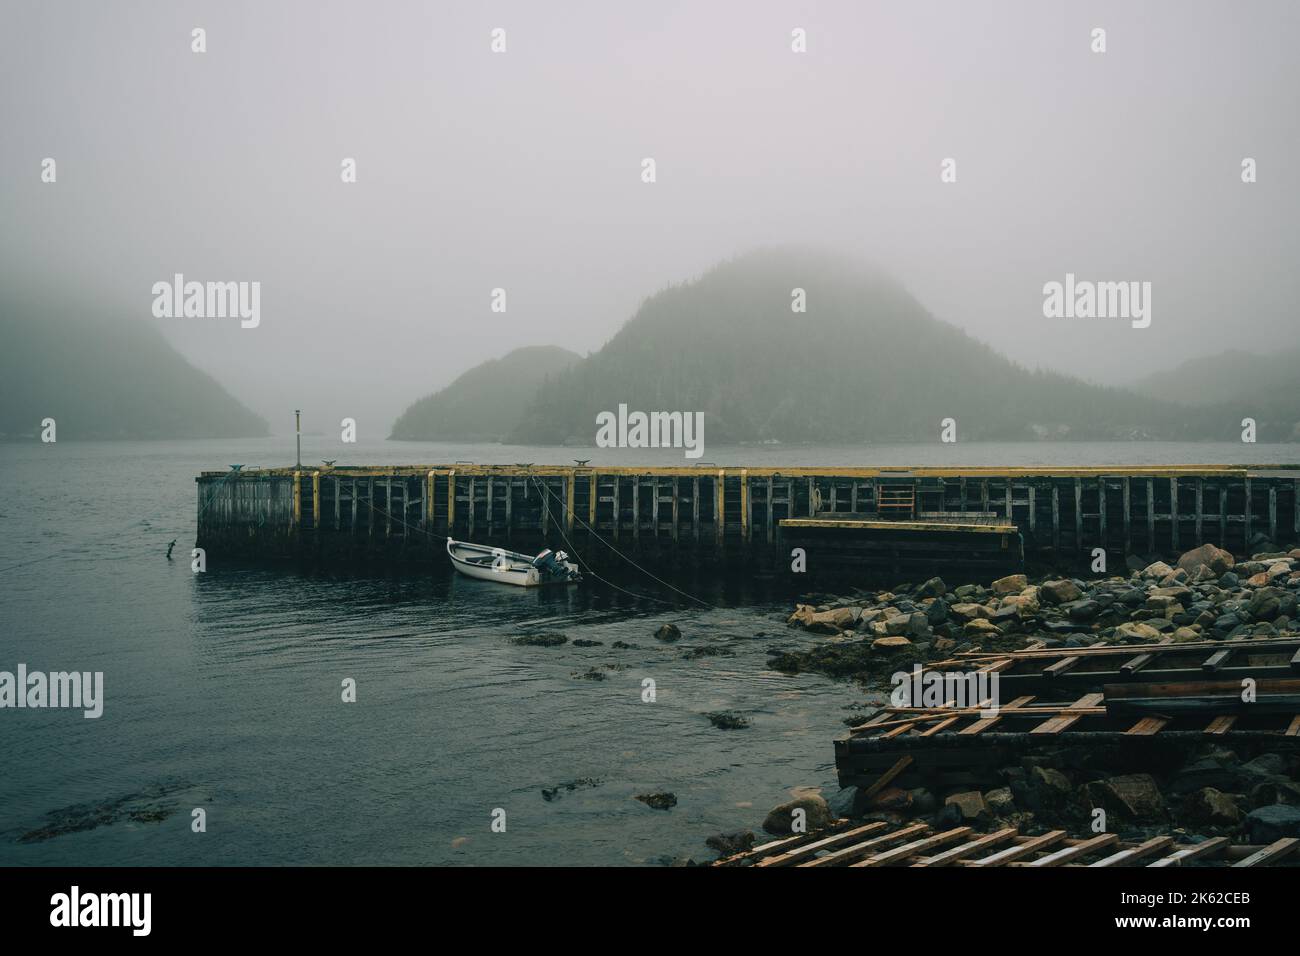 Pier with view of mountains on a foggy evening, Rose Blanche-Harbour le Cou, Newfoundland and Labrador, Canada Stock Photo